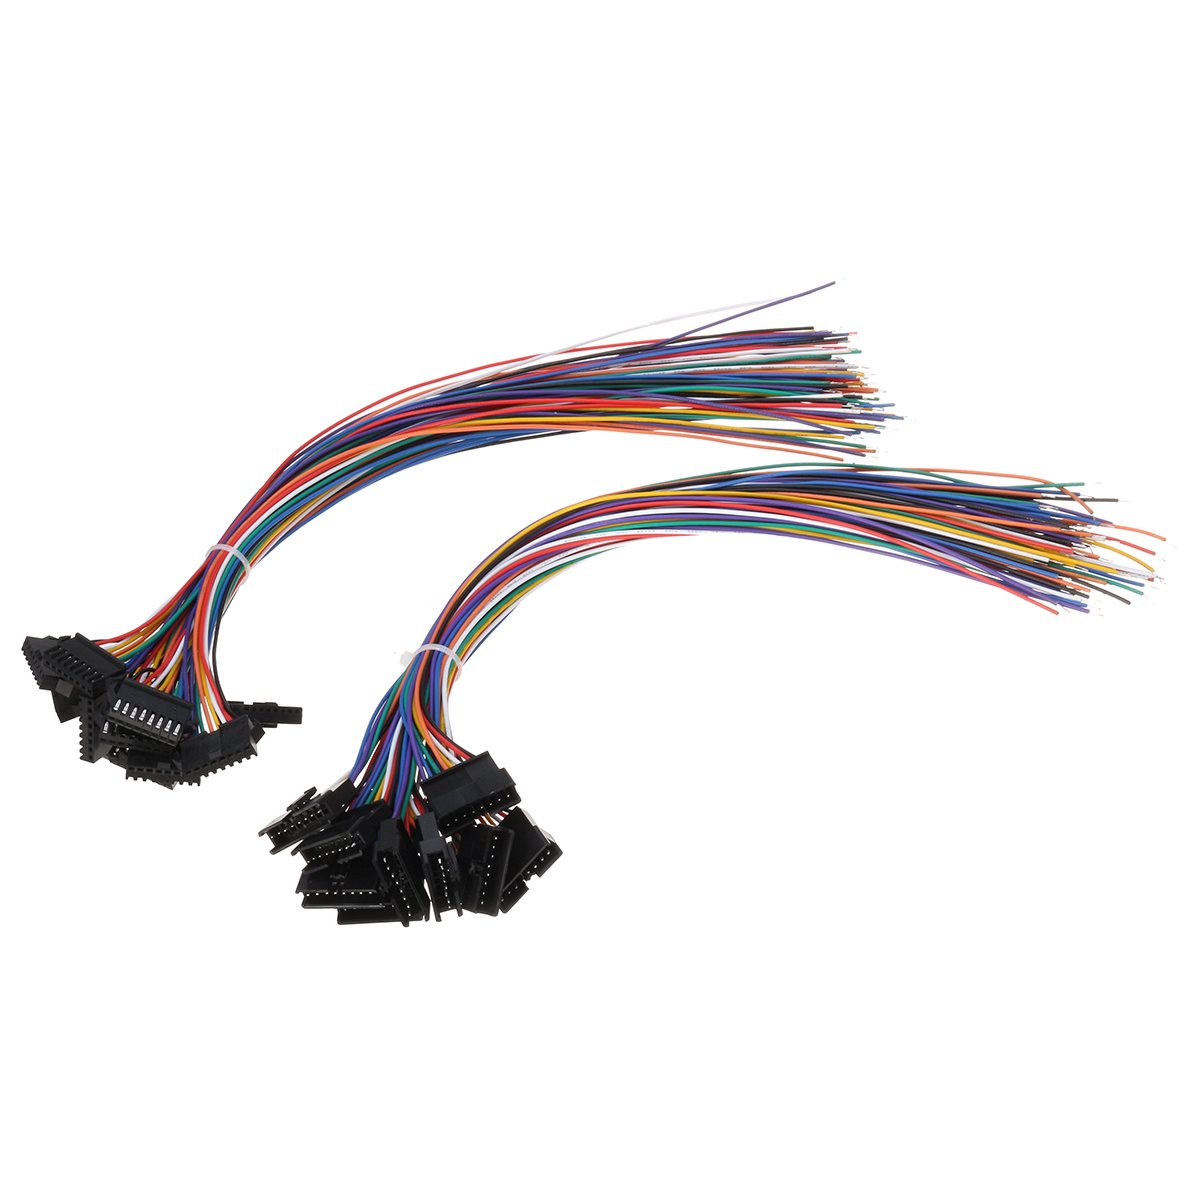 10-Set-Jst-25mm-SM-8-Pin-Male--Female-Connector-Plug-With-Wire-Cable-300mm-1170148-1